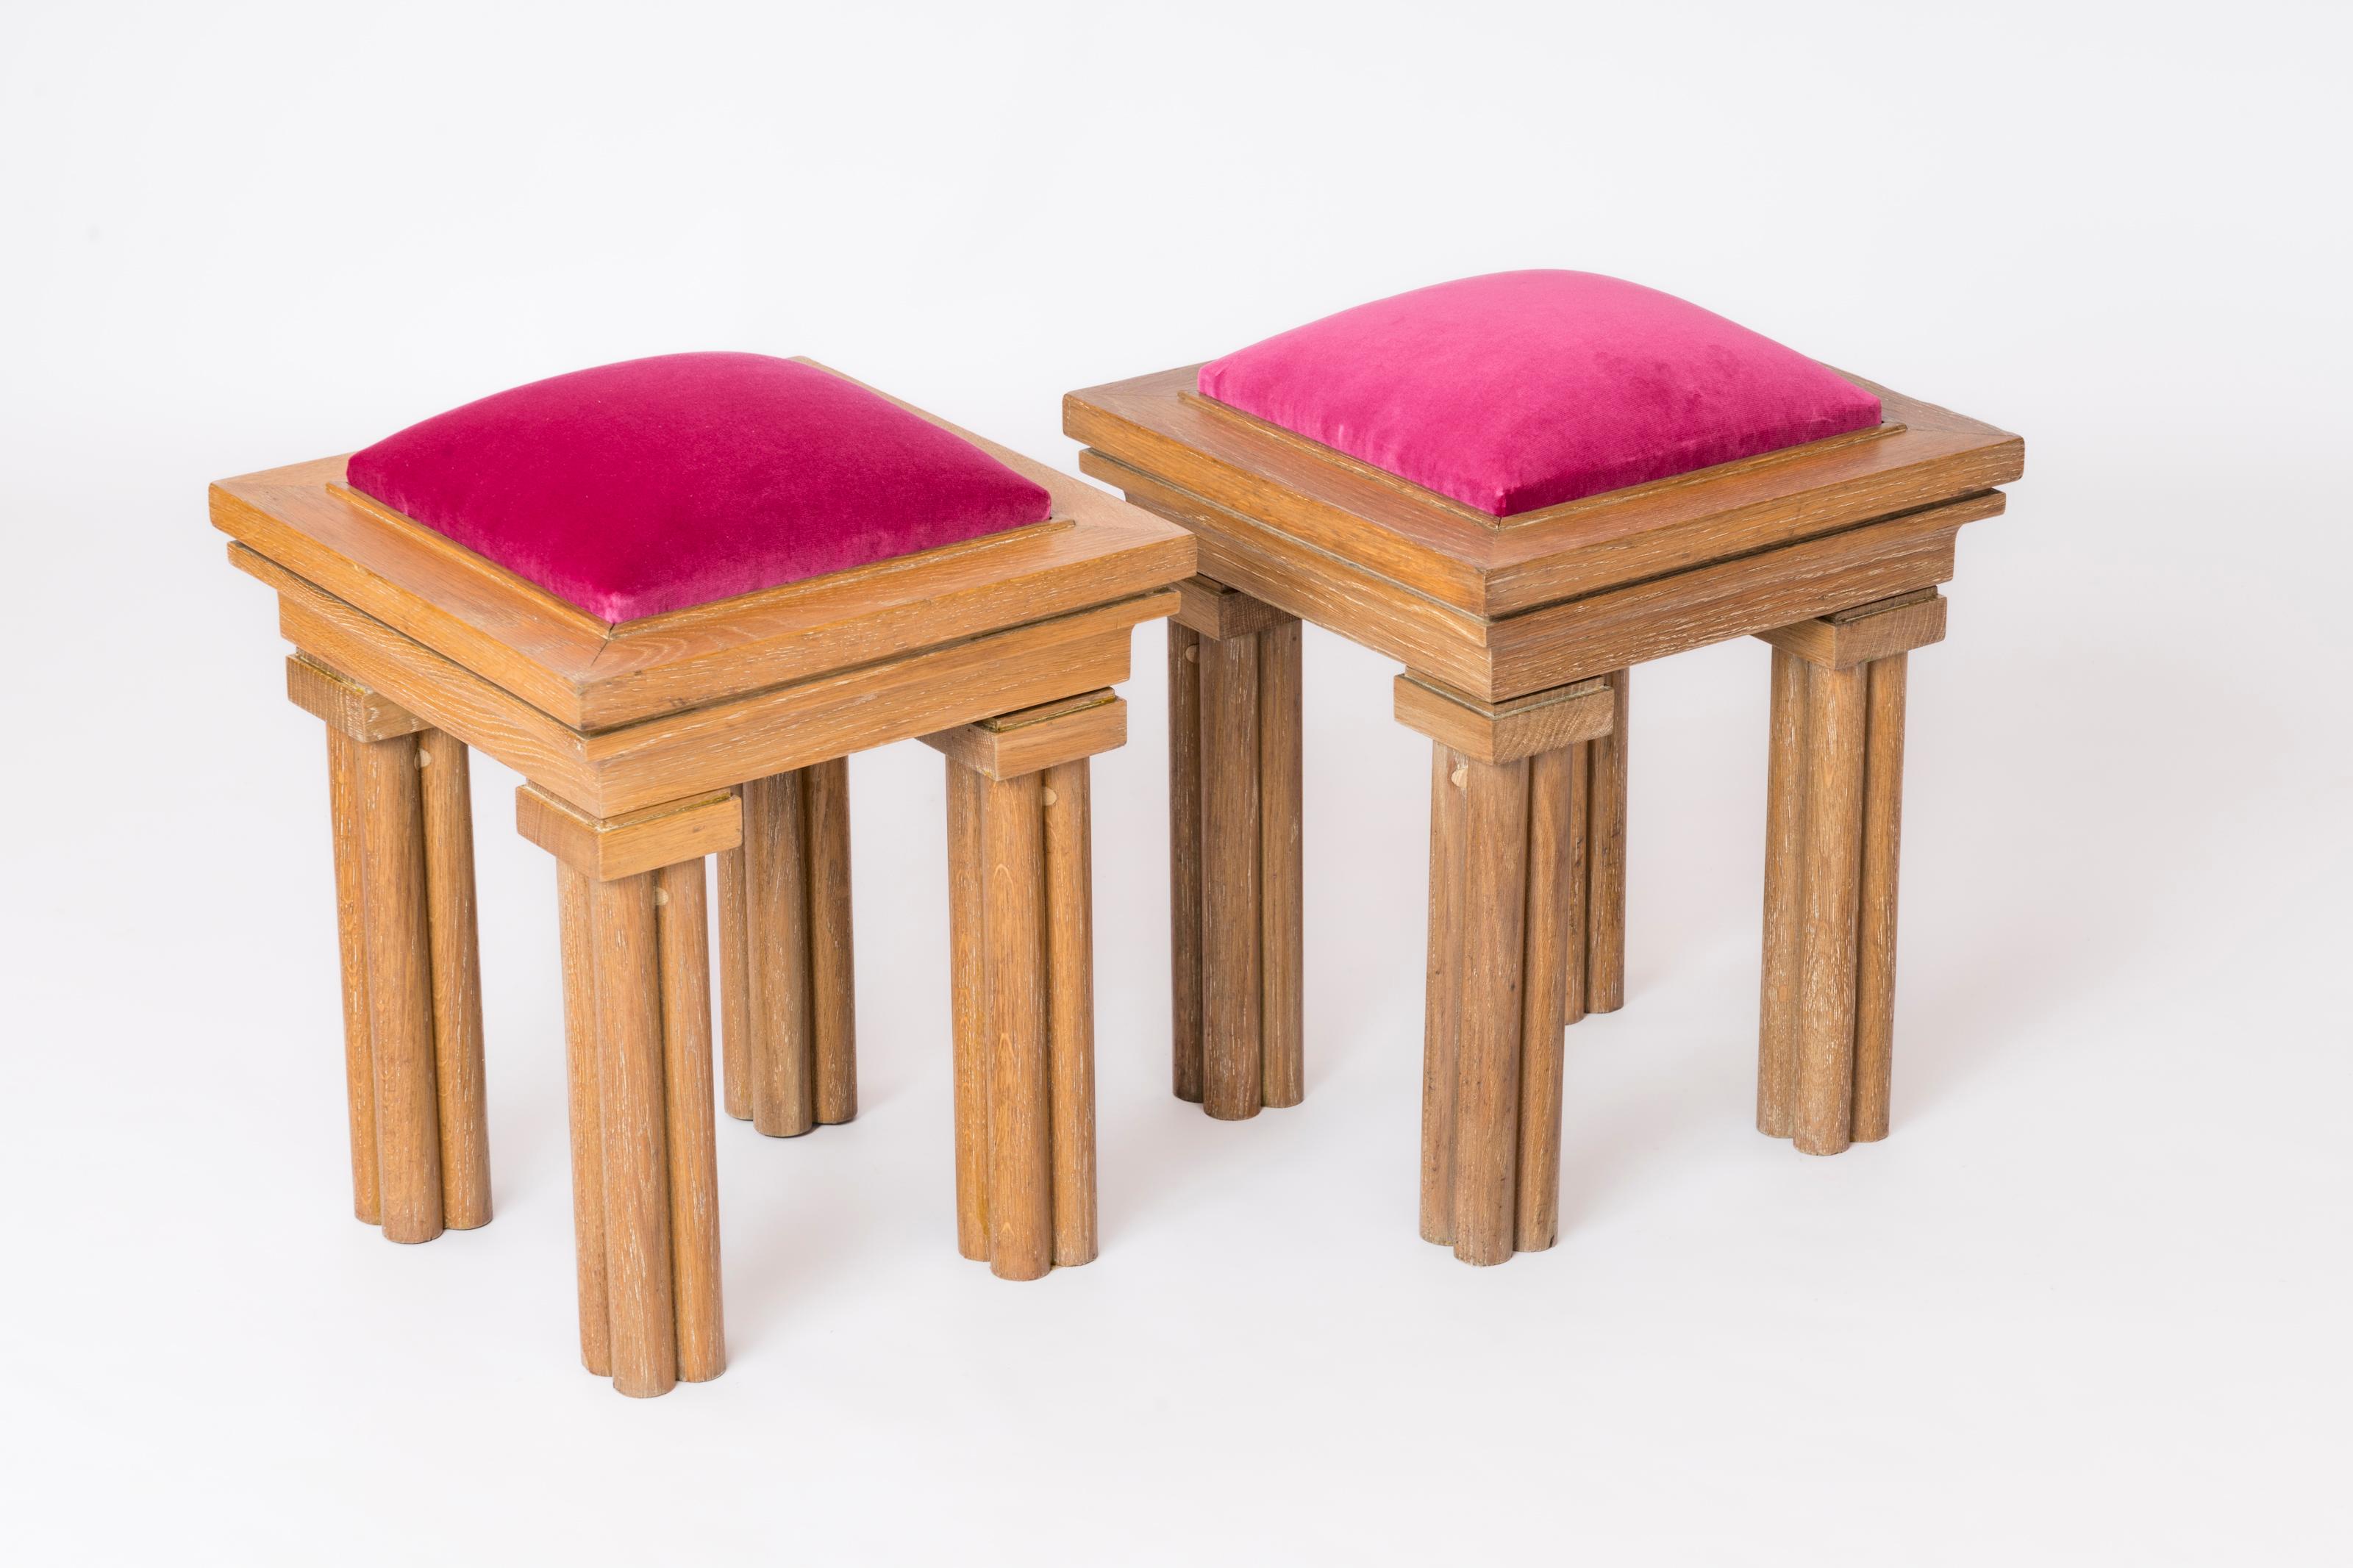 One of a kind pair of lightly cerused solid oak stools
fresh velvet upholstery
slight difference of tones in finish between the two stools
visible oak screw covers on one side of each stool
minor dent on one leg of one stool (see last